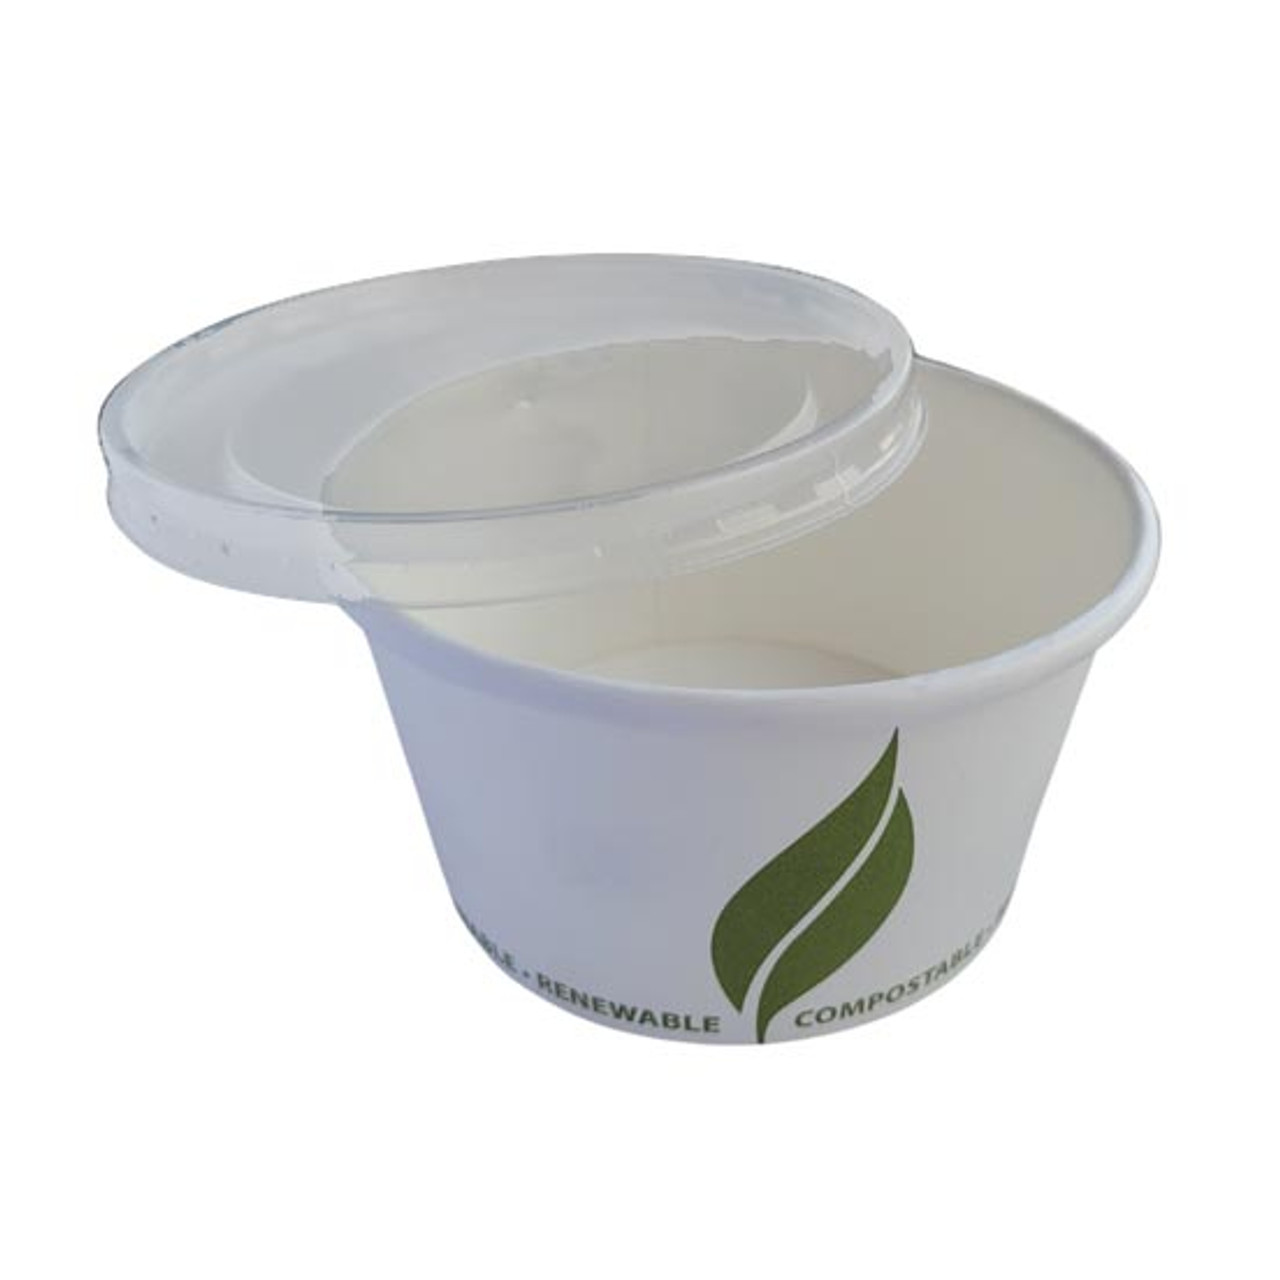 Food Soup Containers With Lids, Plastic Take Out Bowls, Food